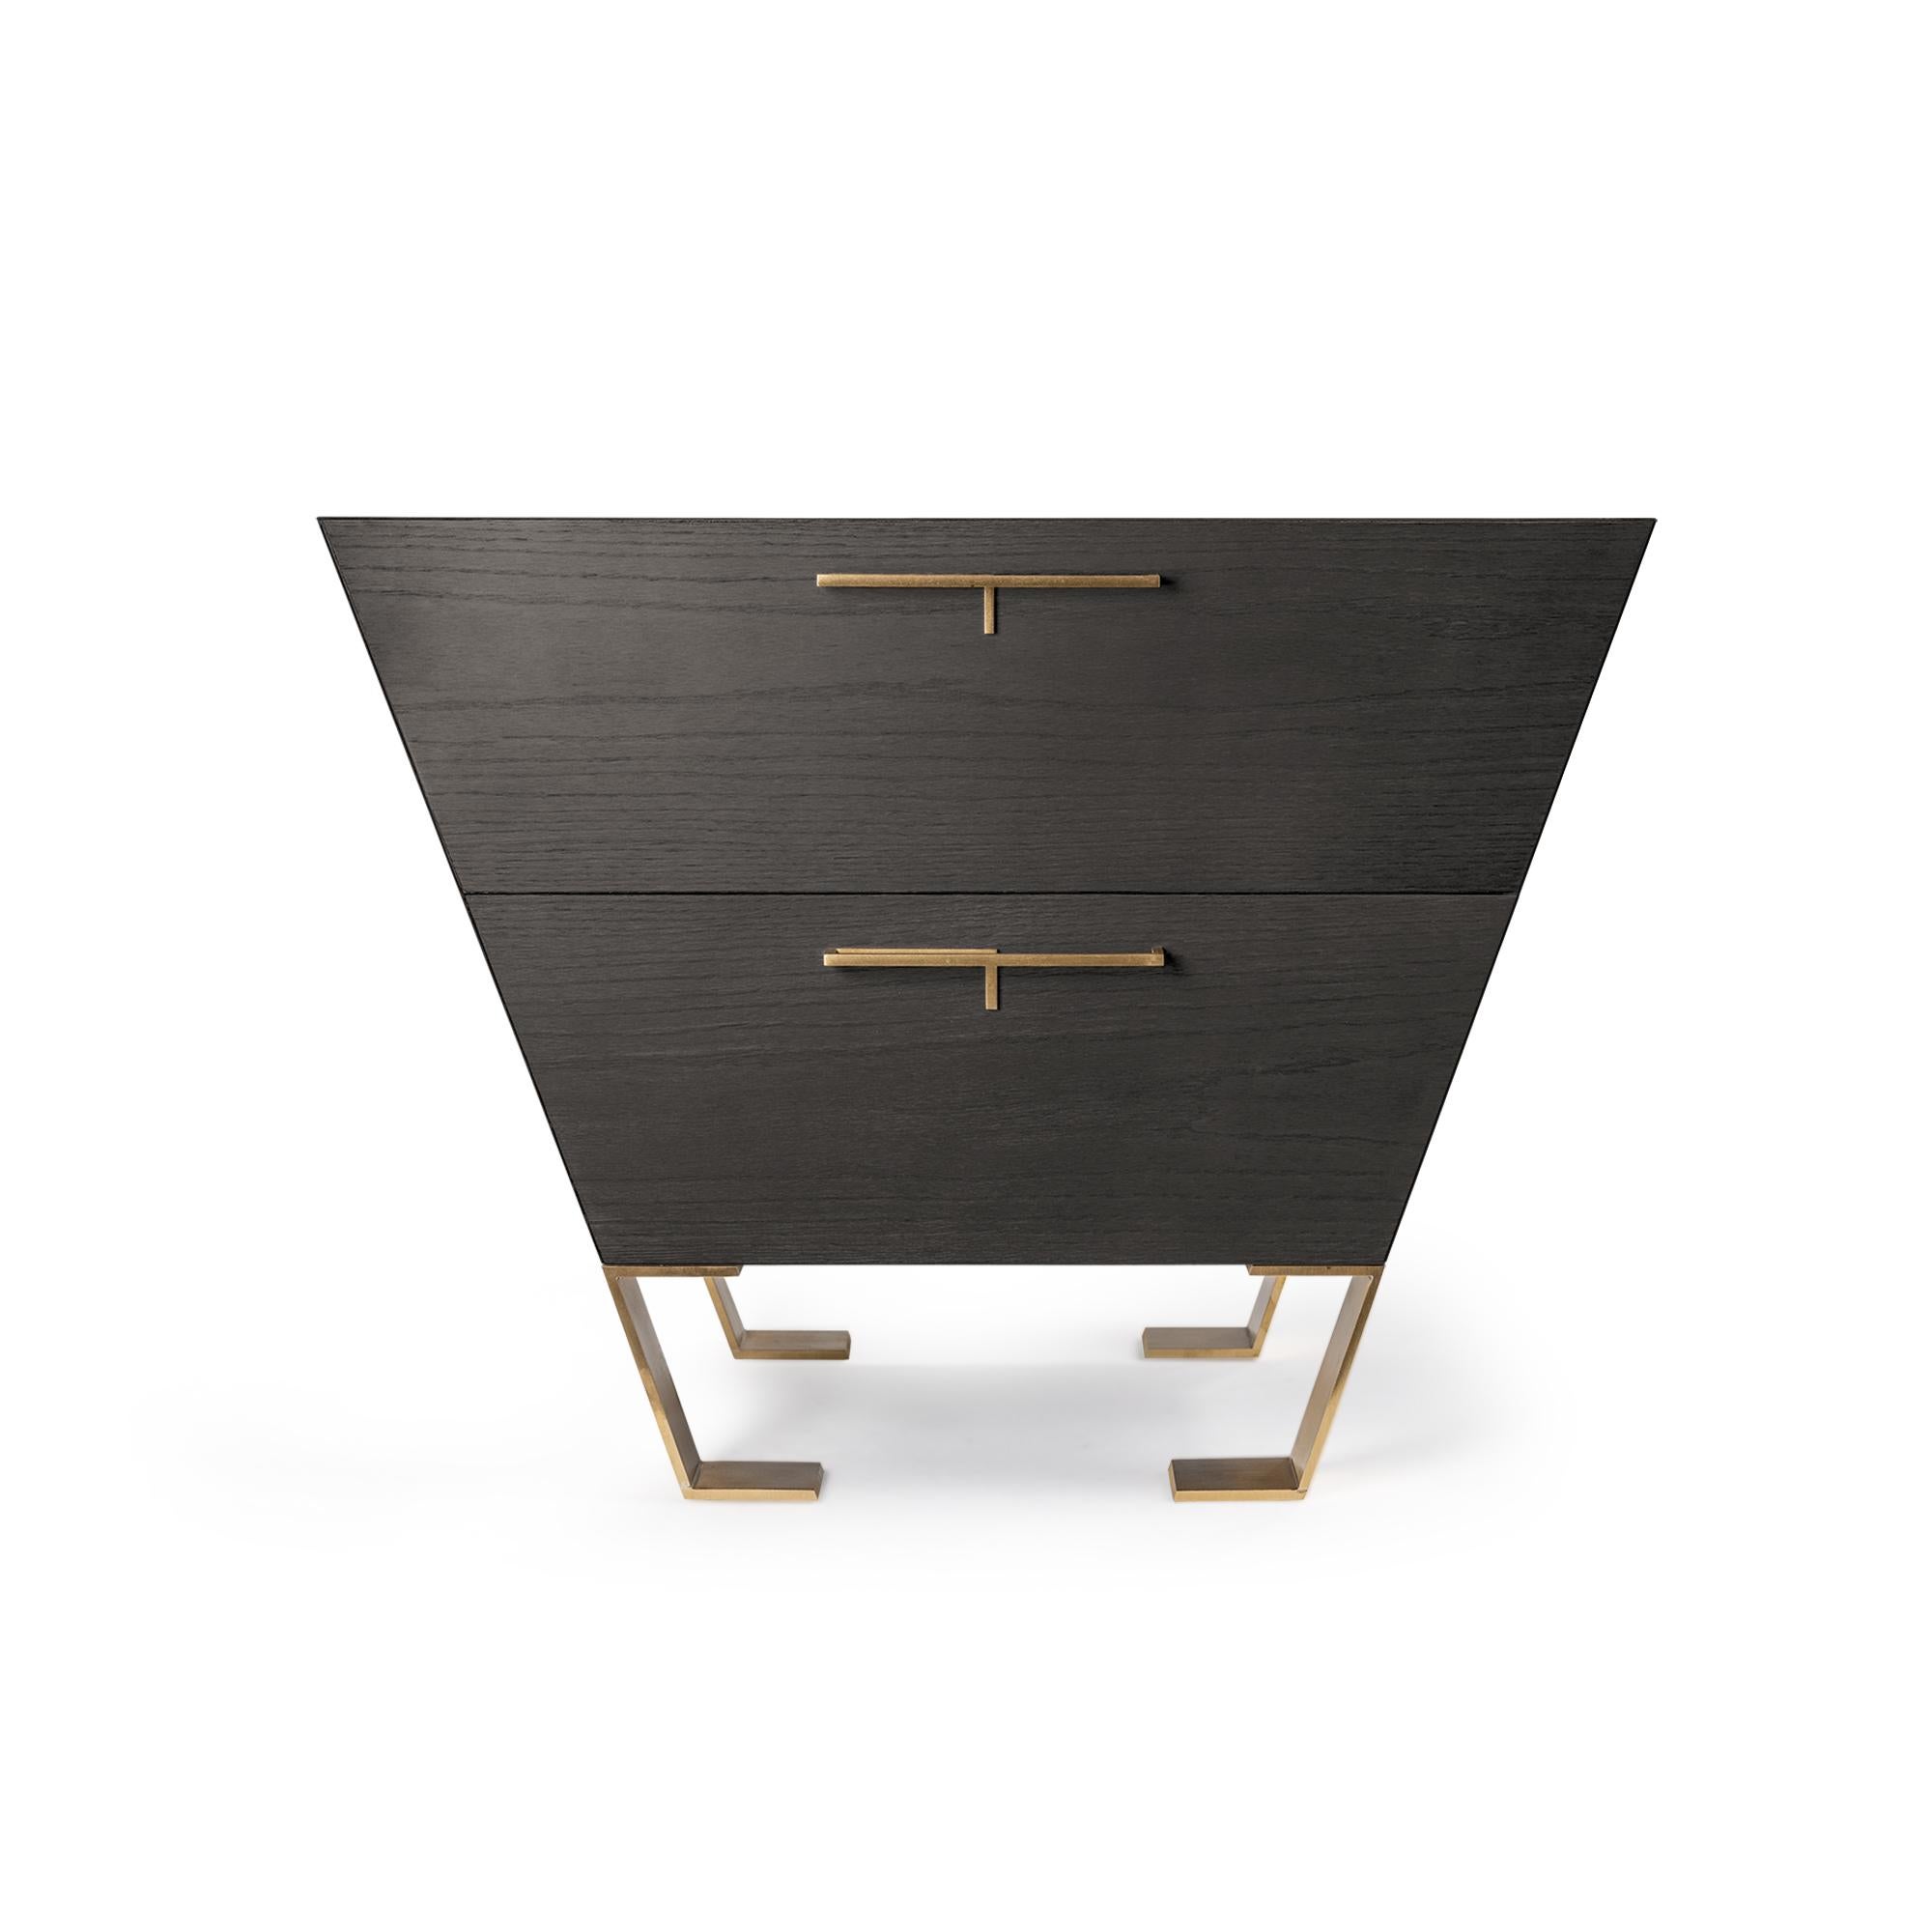 The shape of this container with drawers is defined by its sinuous lines and 45-degree cuts. Although part of the Fourmosa credenza, this piece was designed to maintain its same elegance when used alone, as well. This piece is a product of masterful